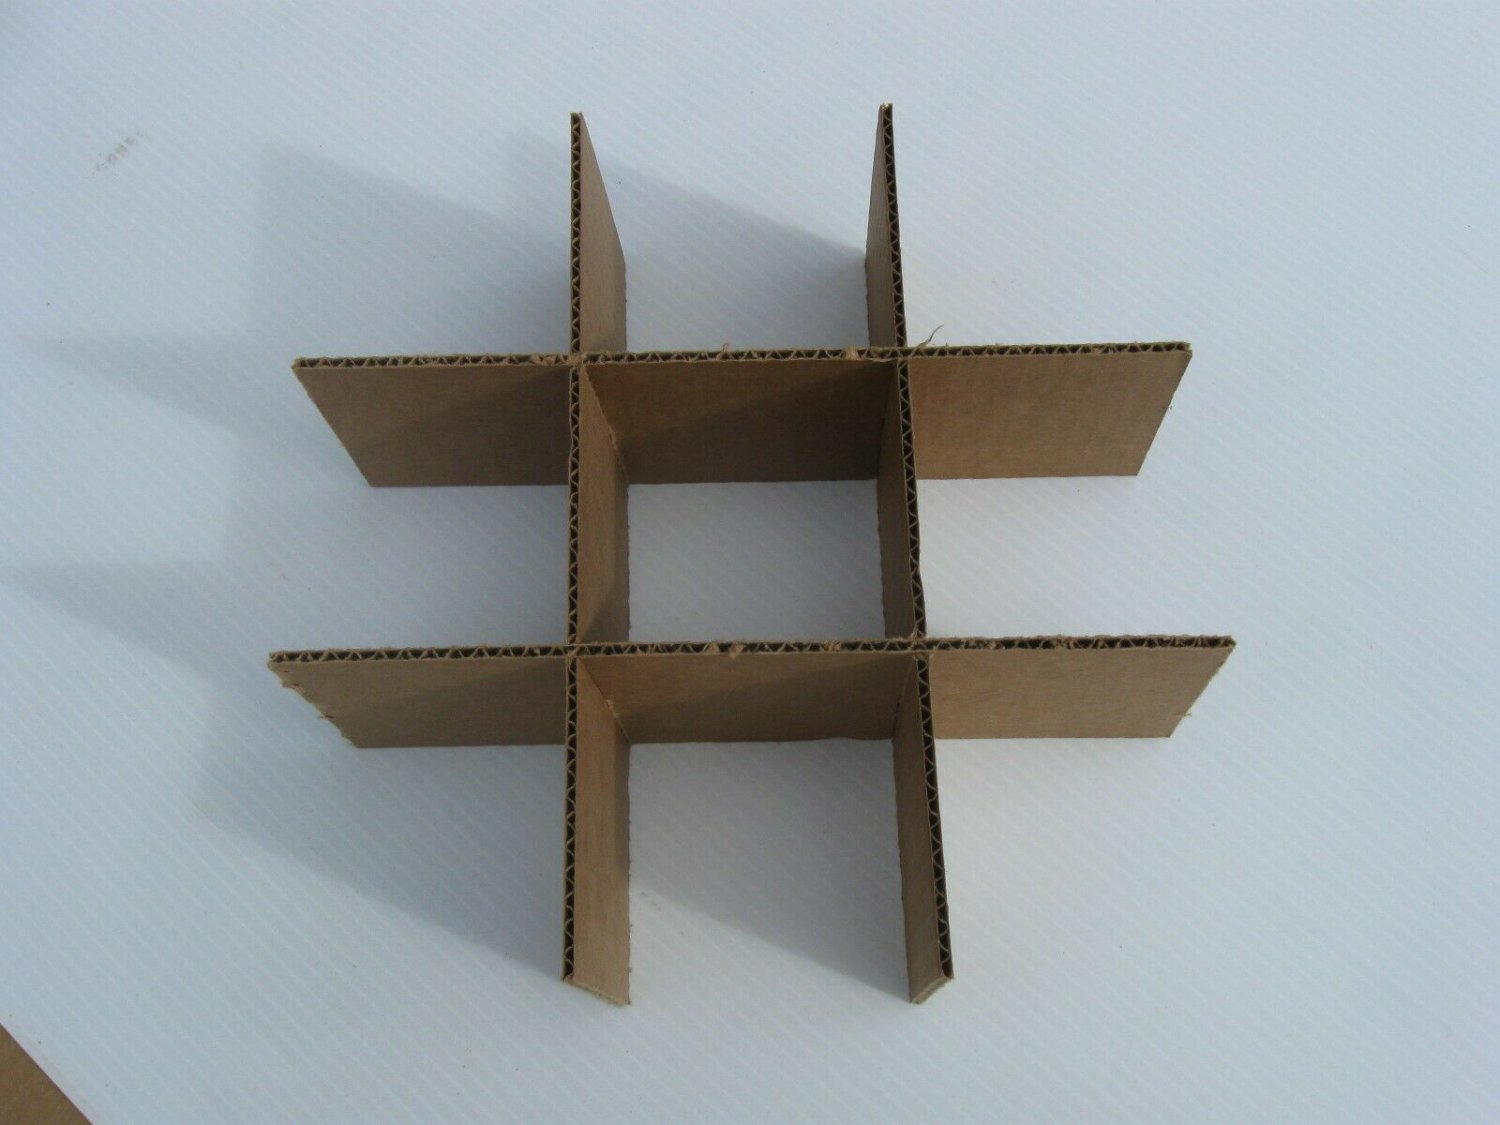 Cardboard Dividers 5 Sets 12 X 12 X 2 High 64 Cell B 12-2-07 